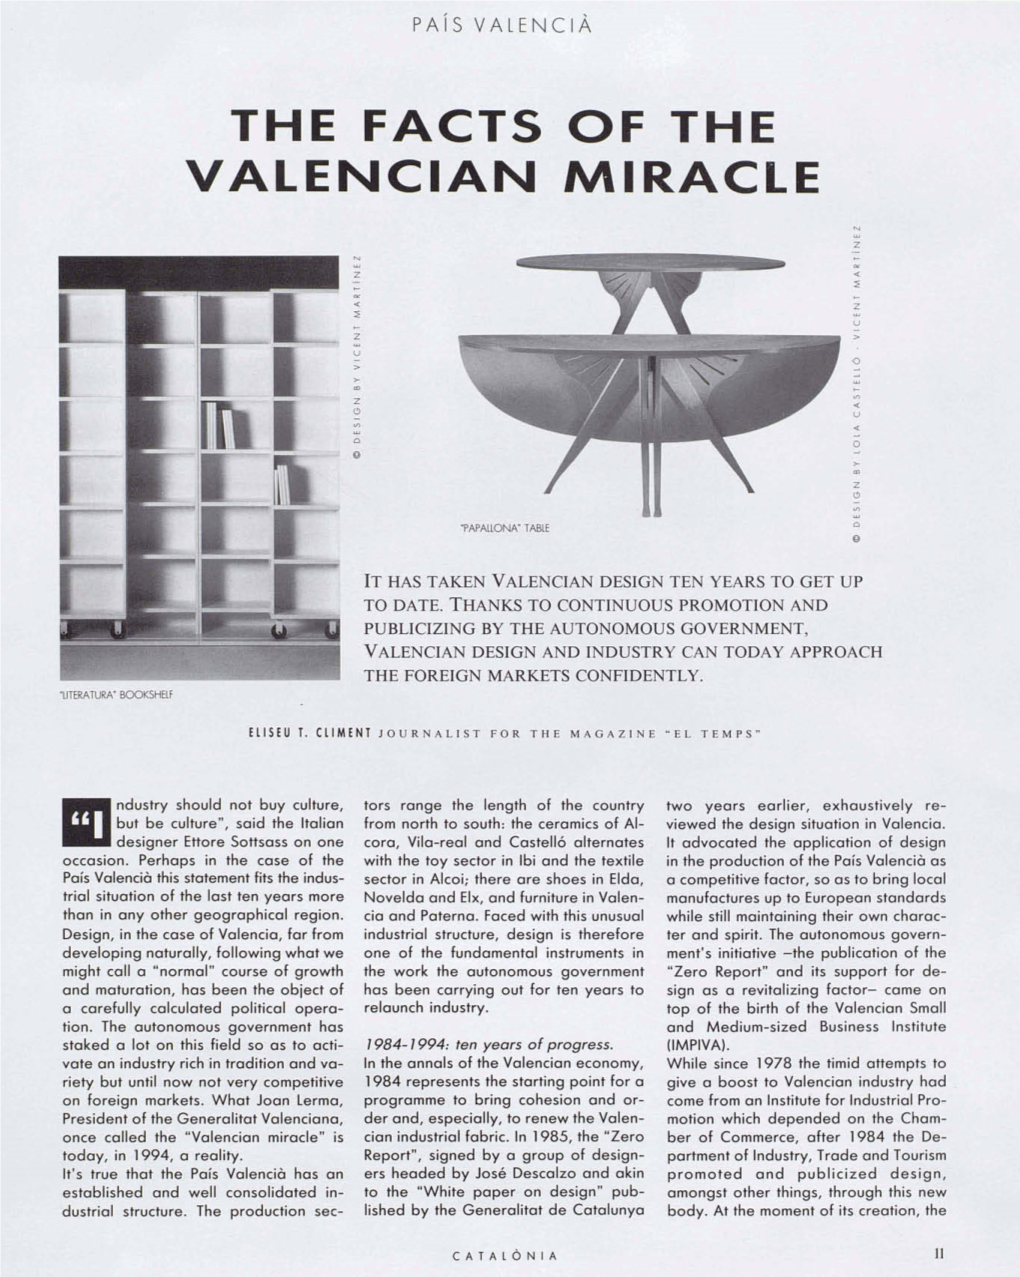 The Facts of the Valencian Miracle